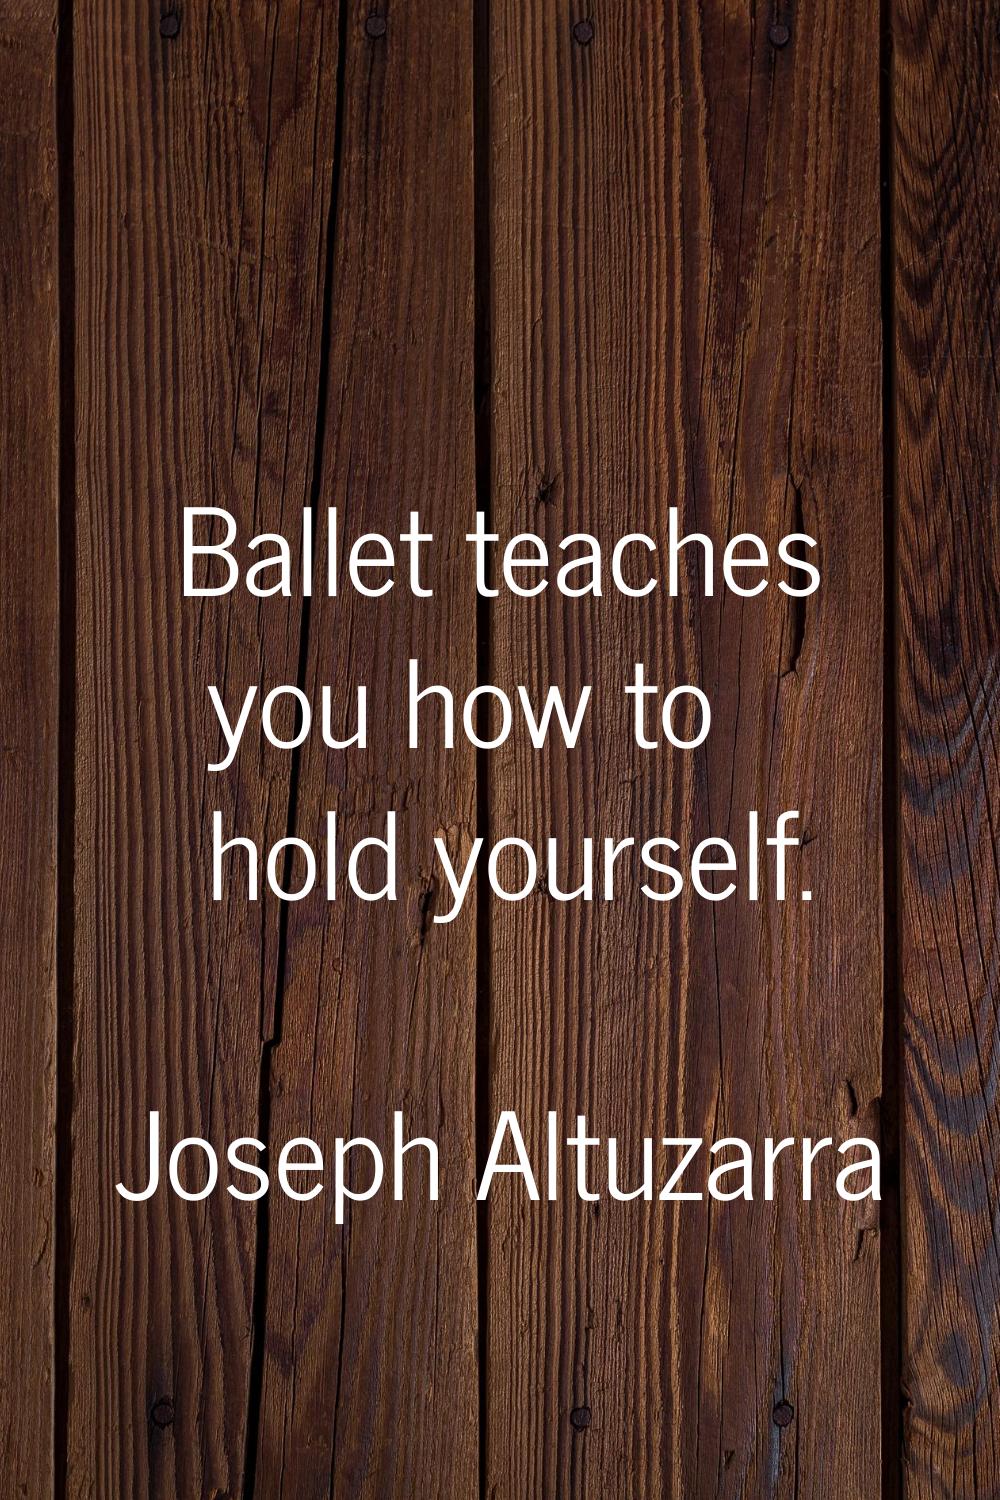 Ballet teaches you how to hold yourself.